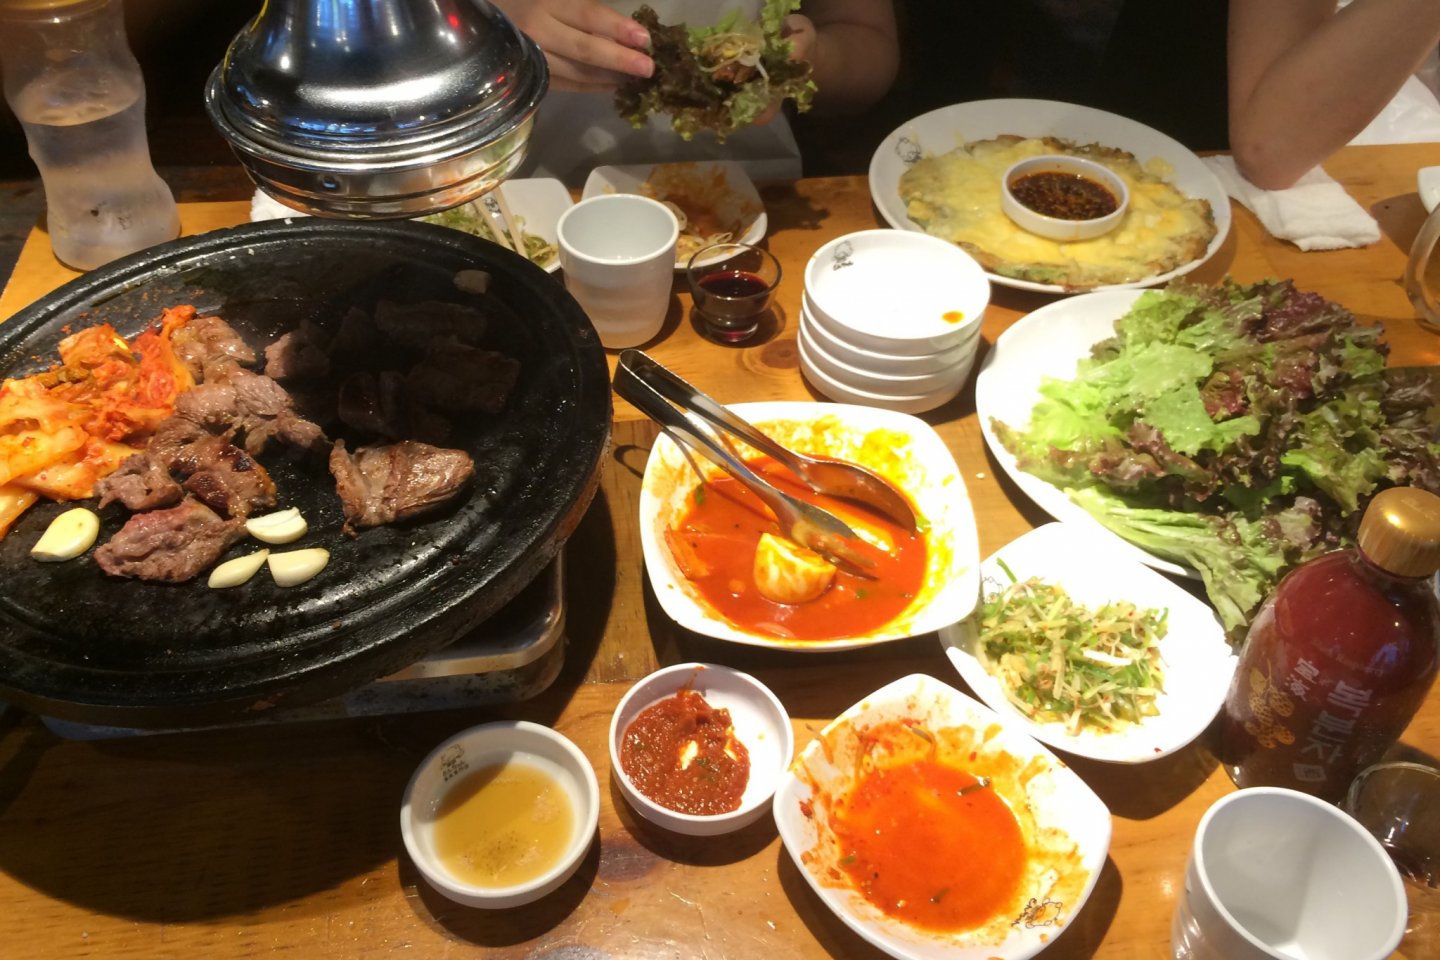 Korean barbecue and a korean-style cheese and shrimp pancake are the highlights of this meal in Shin-Okubo.